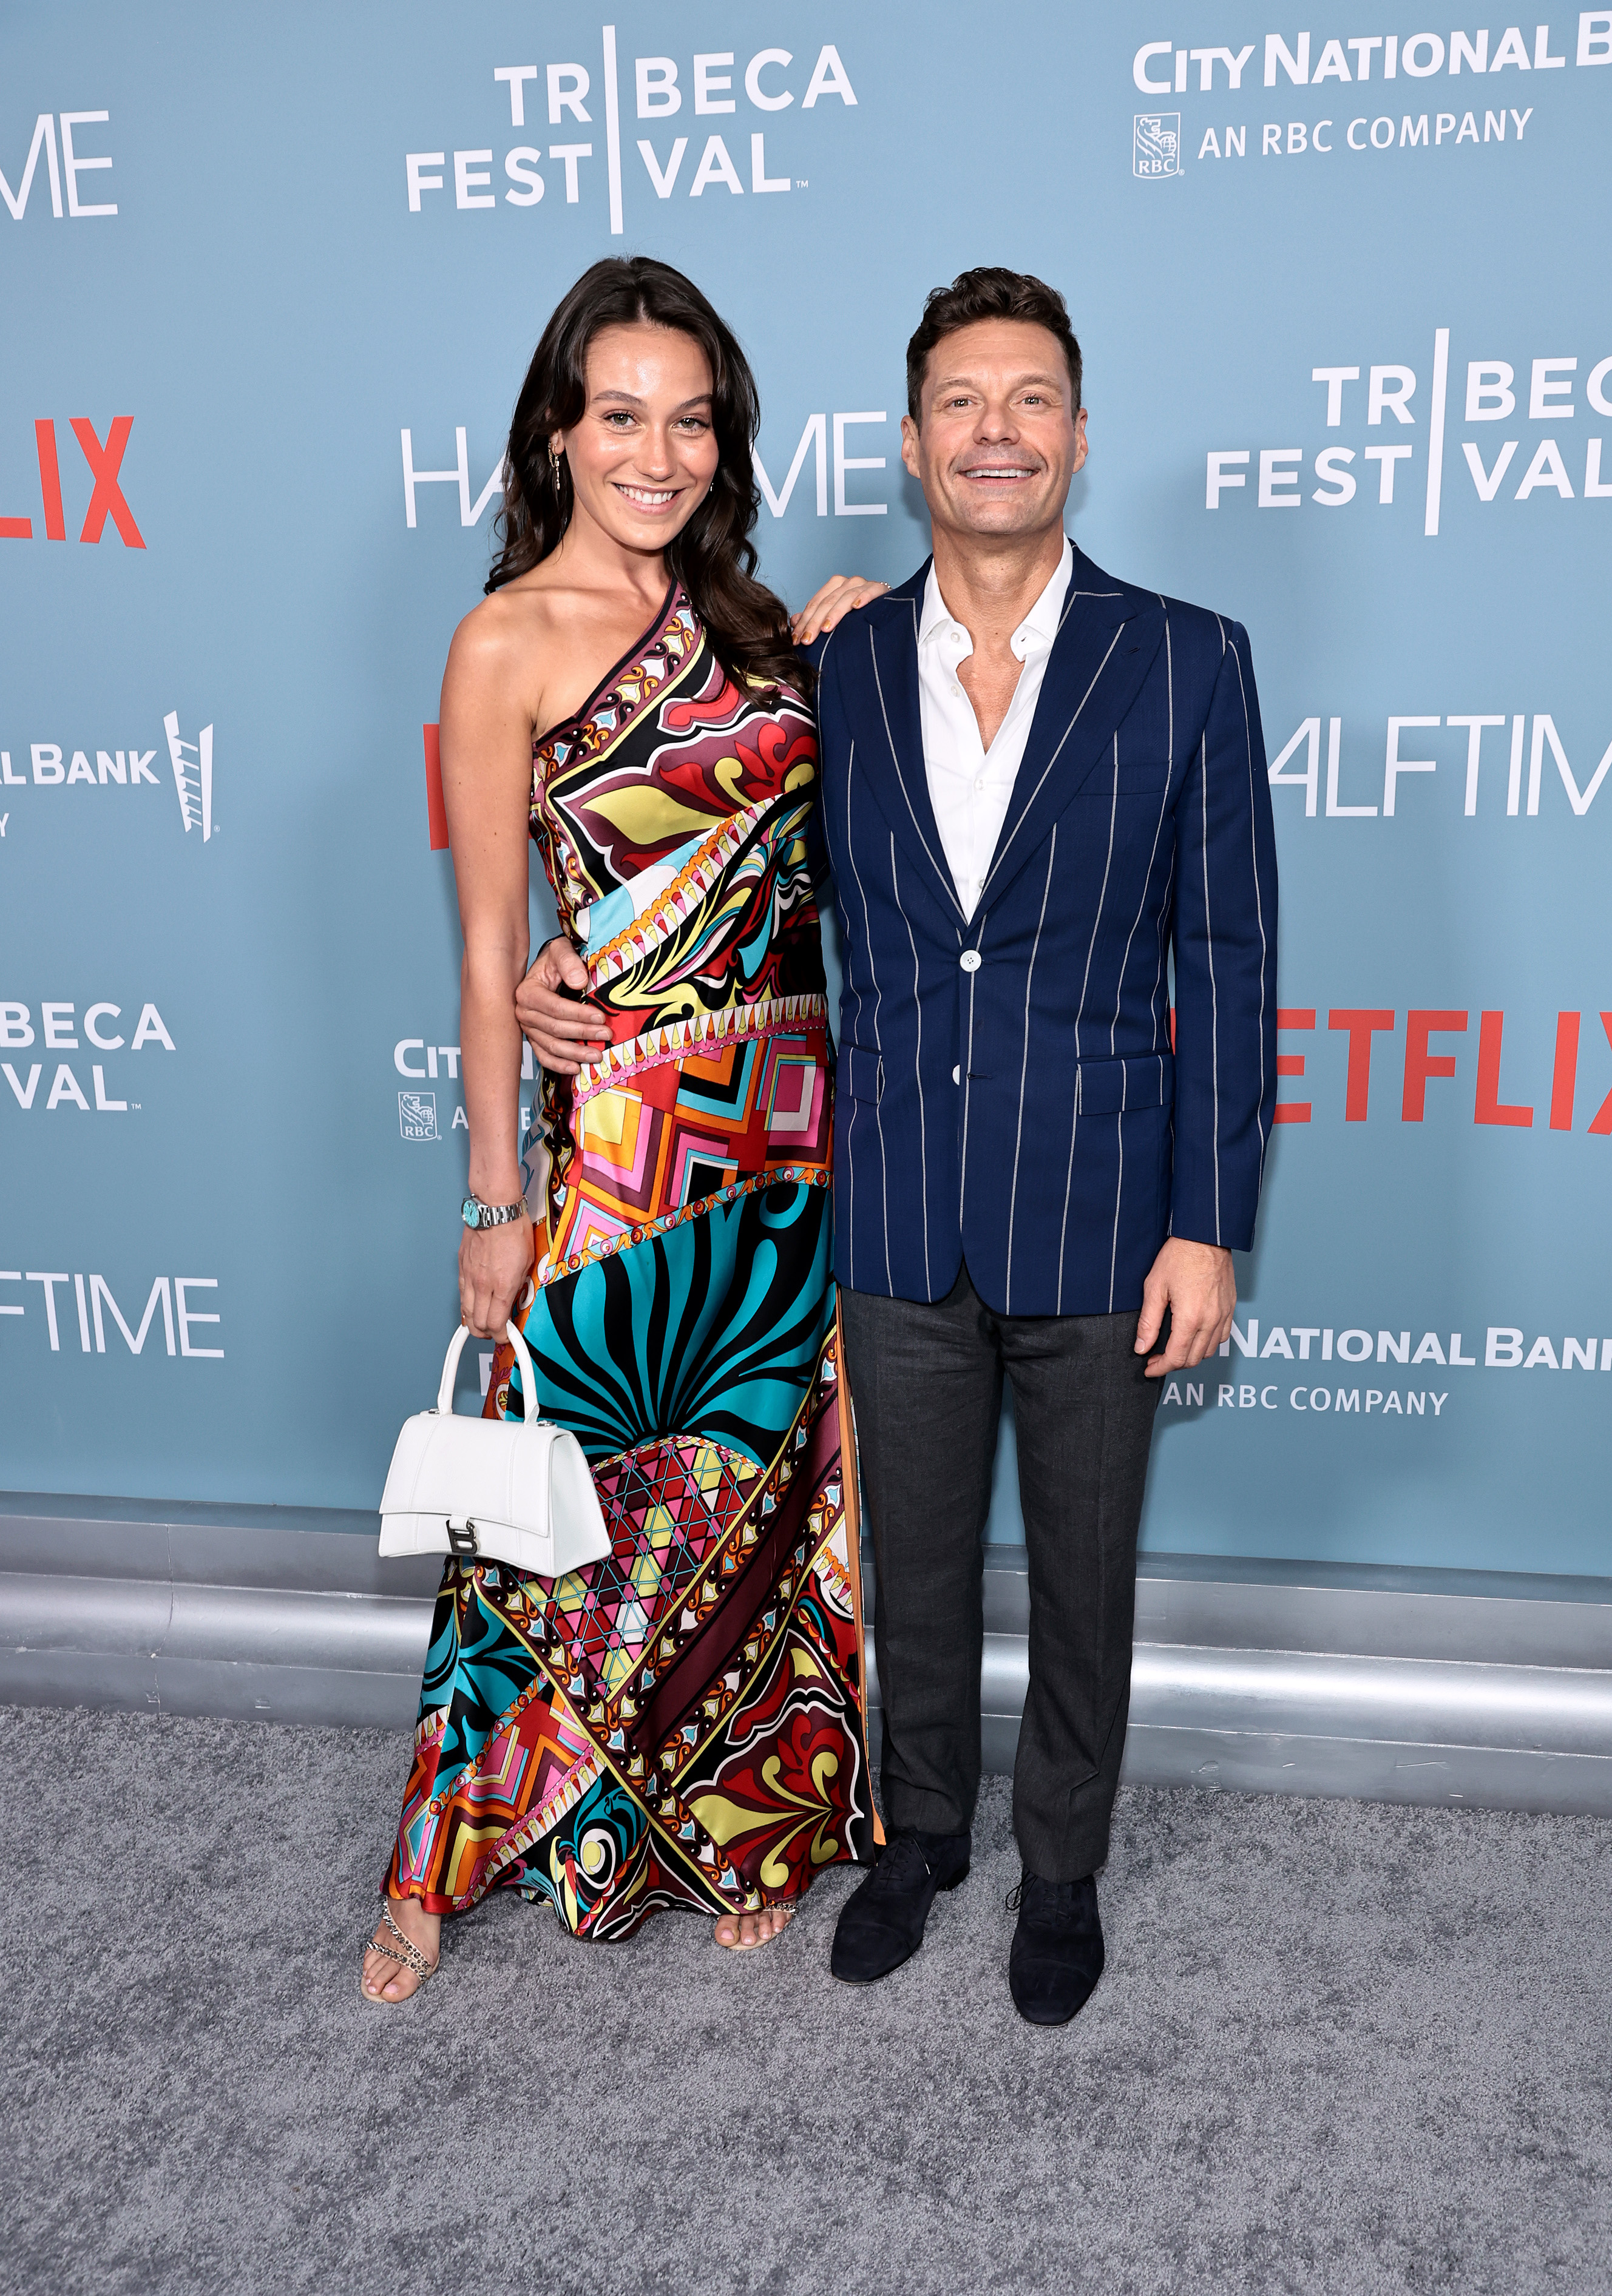 Aubrey Paige Petcosky and Ryan Seacrest attend the "Halftime" Premiere during the Tribeca Festival Opening Night on June 8, 2022, in New York City. | Source: Getty Images